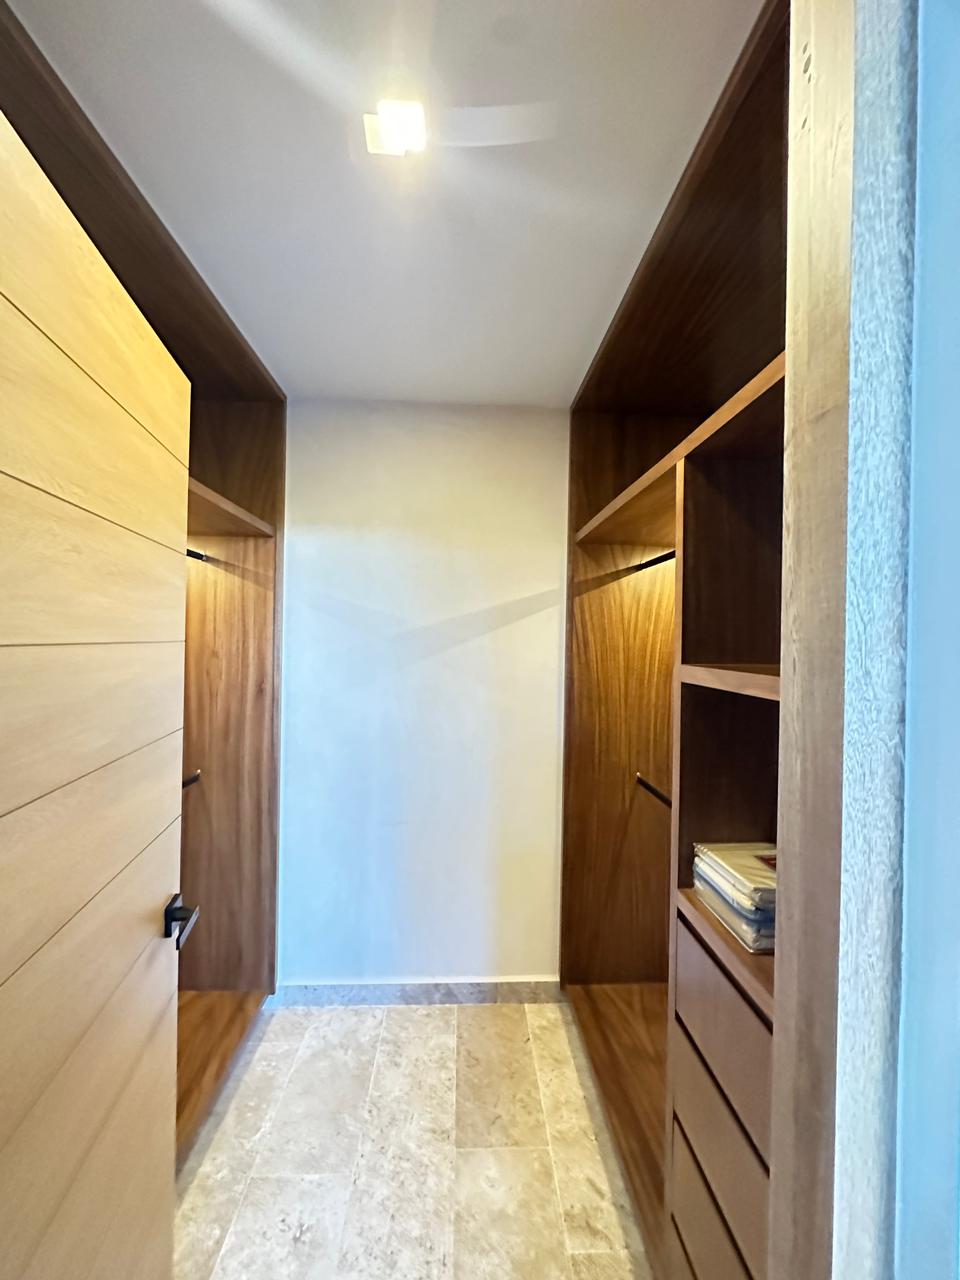 exclusive residences for sale in tulum the enclave closet and dressing room